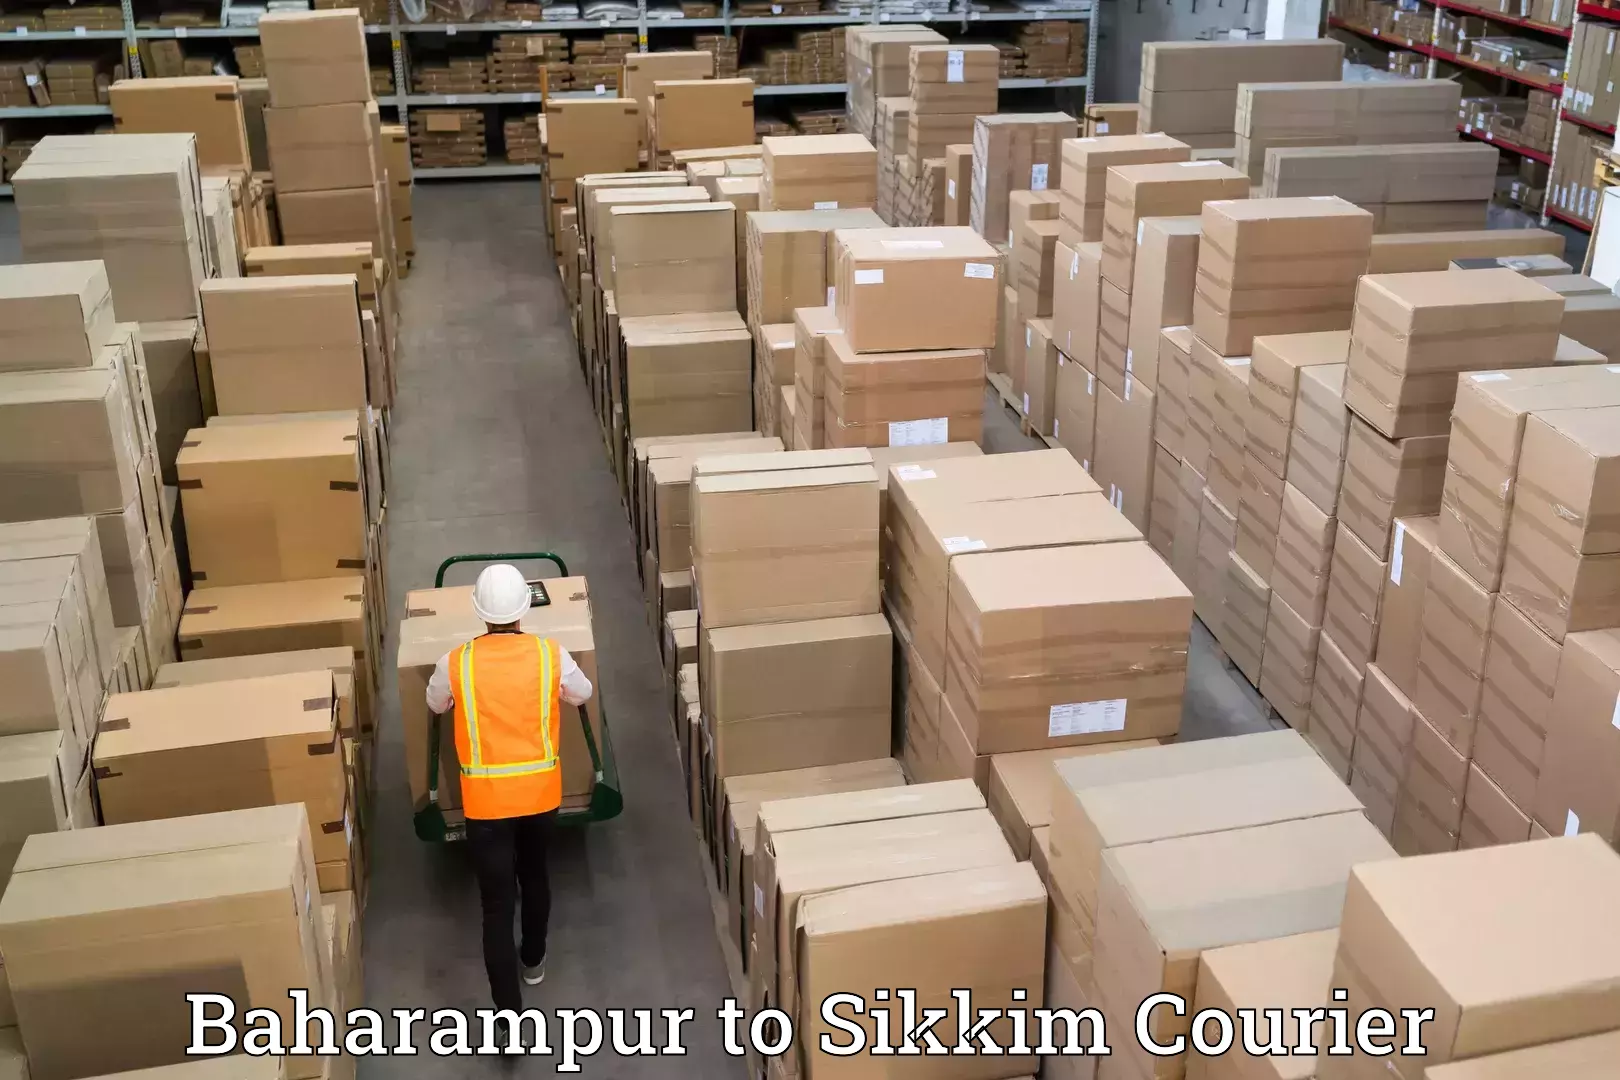 Trusted relocation services in Baharampur to Sikkim